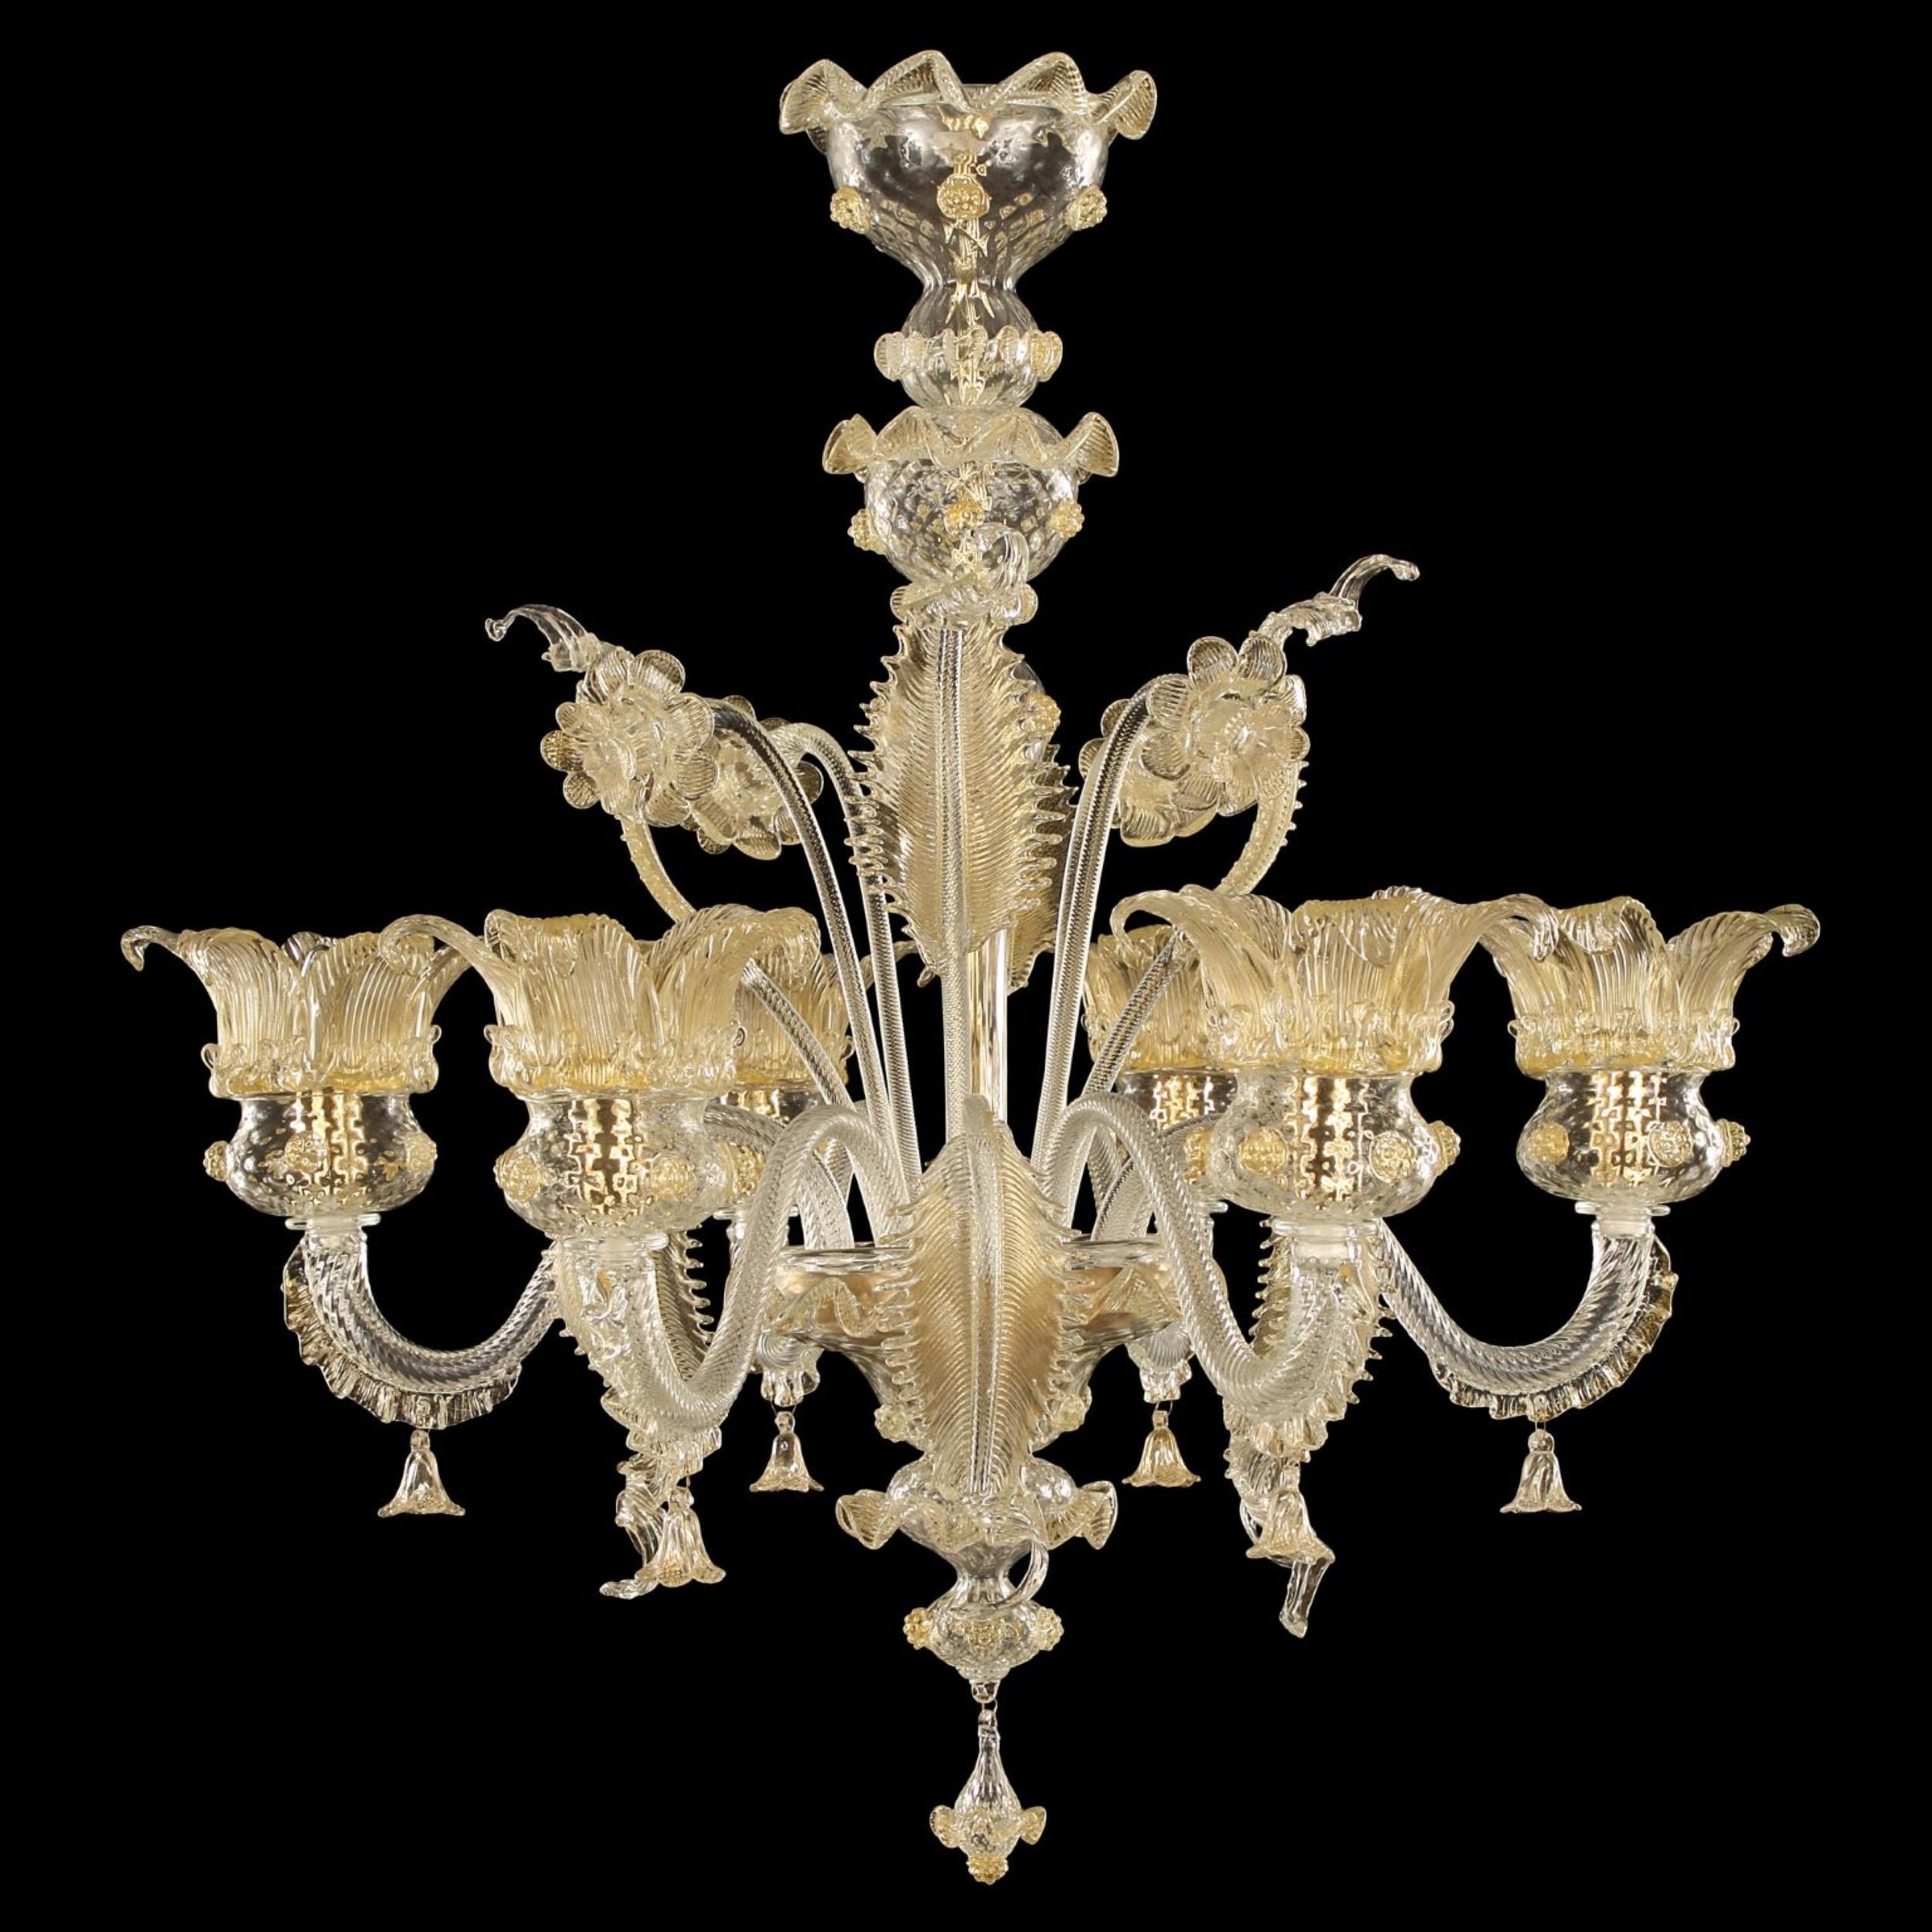 Luxury chandelier 6 arms clear Murano glass gold details Golden Century87 by Multiforme
The collection Golden century 087 by Multiforme lighting is a tribute to the magic and the richness of the XVIIIth Venice. It presents the same structure of the